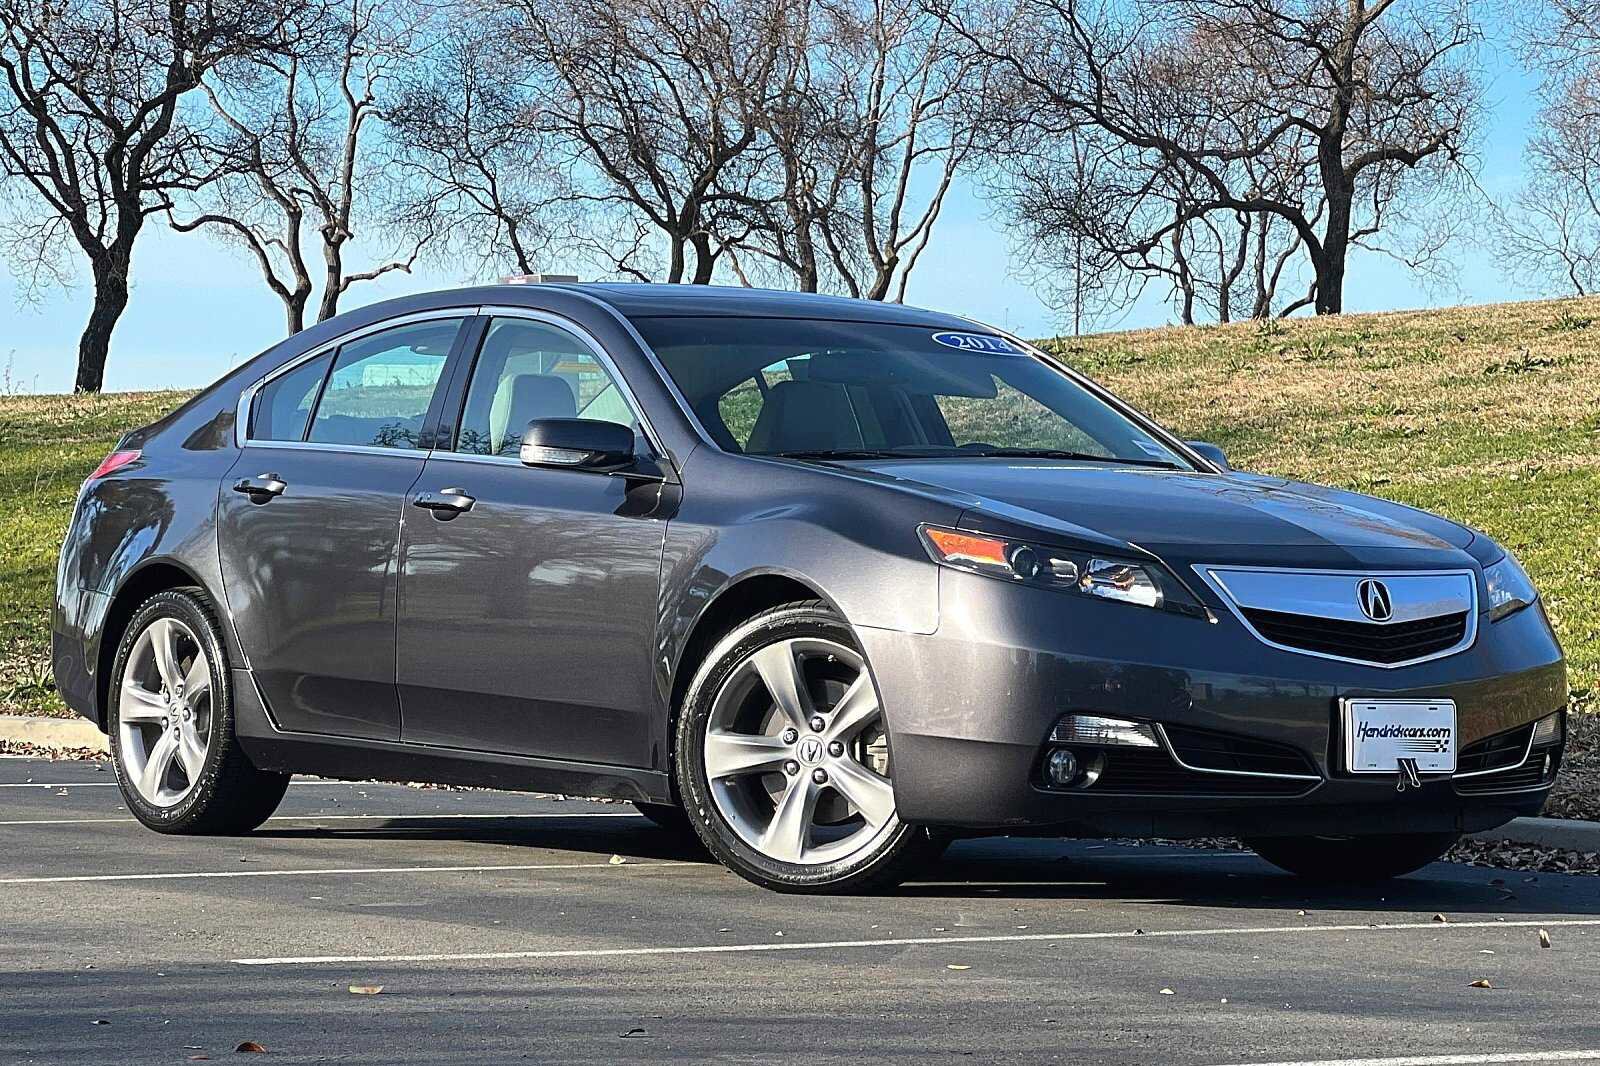 Pre-Owned 2014 Acura TL SH-AWD Tech Sedan in Tallahassee #Q01762A | Dale  Earnhardt Jr. Chevrolet